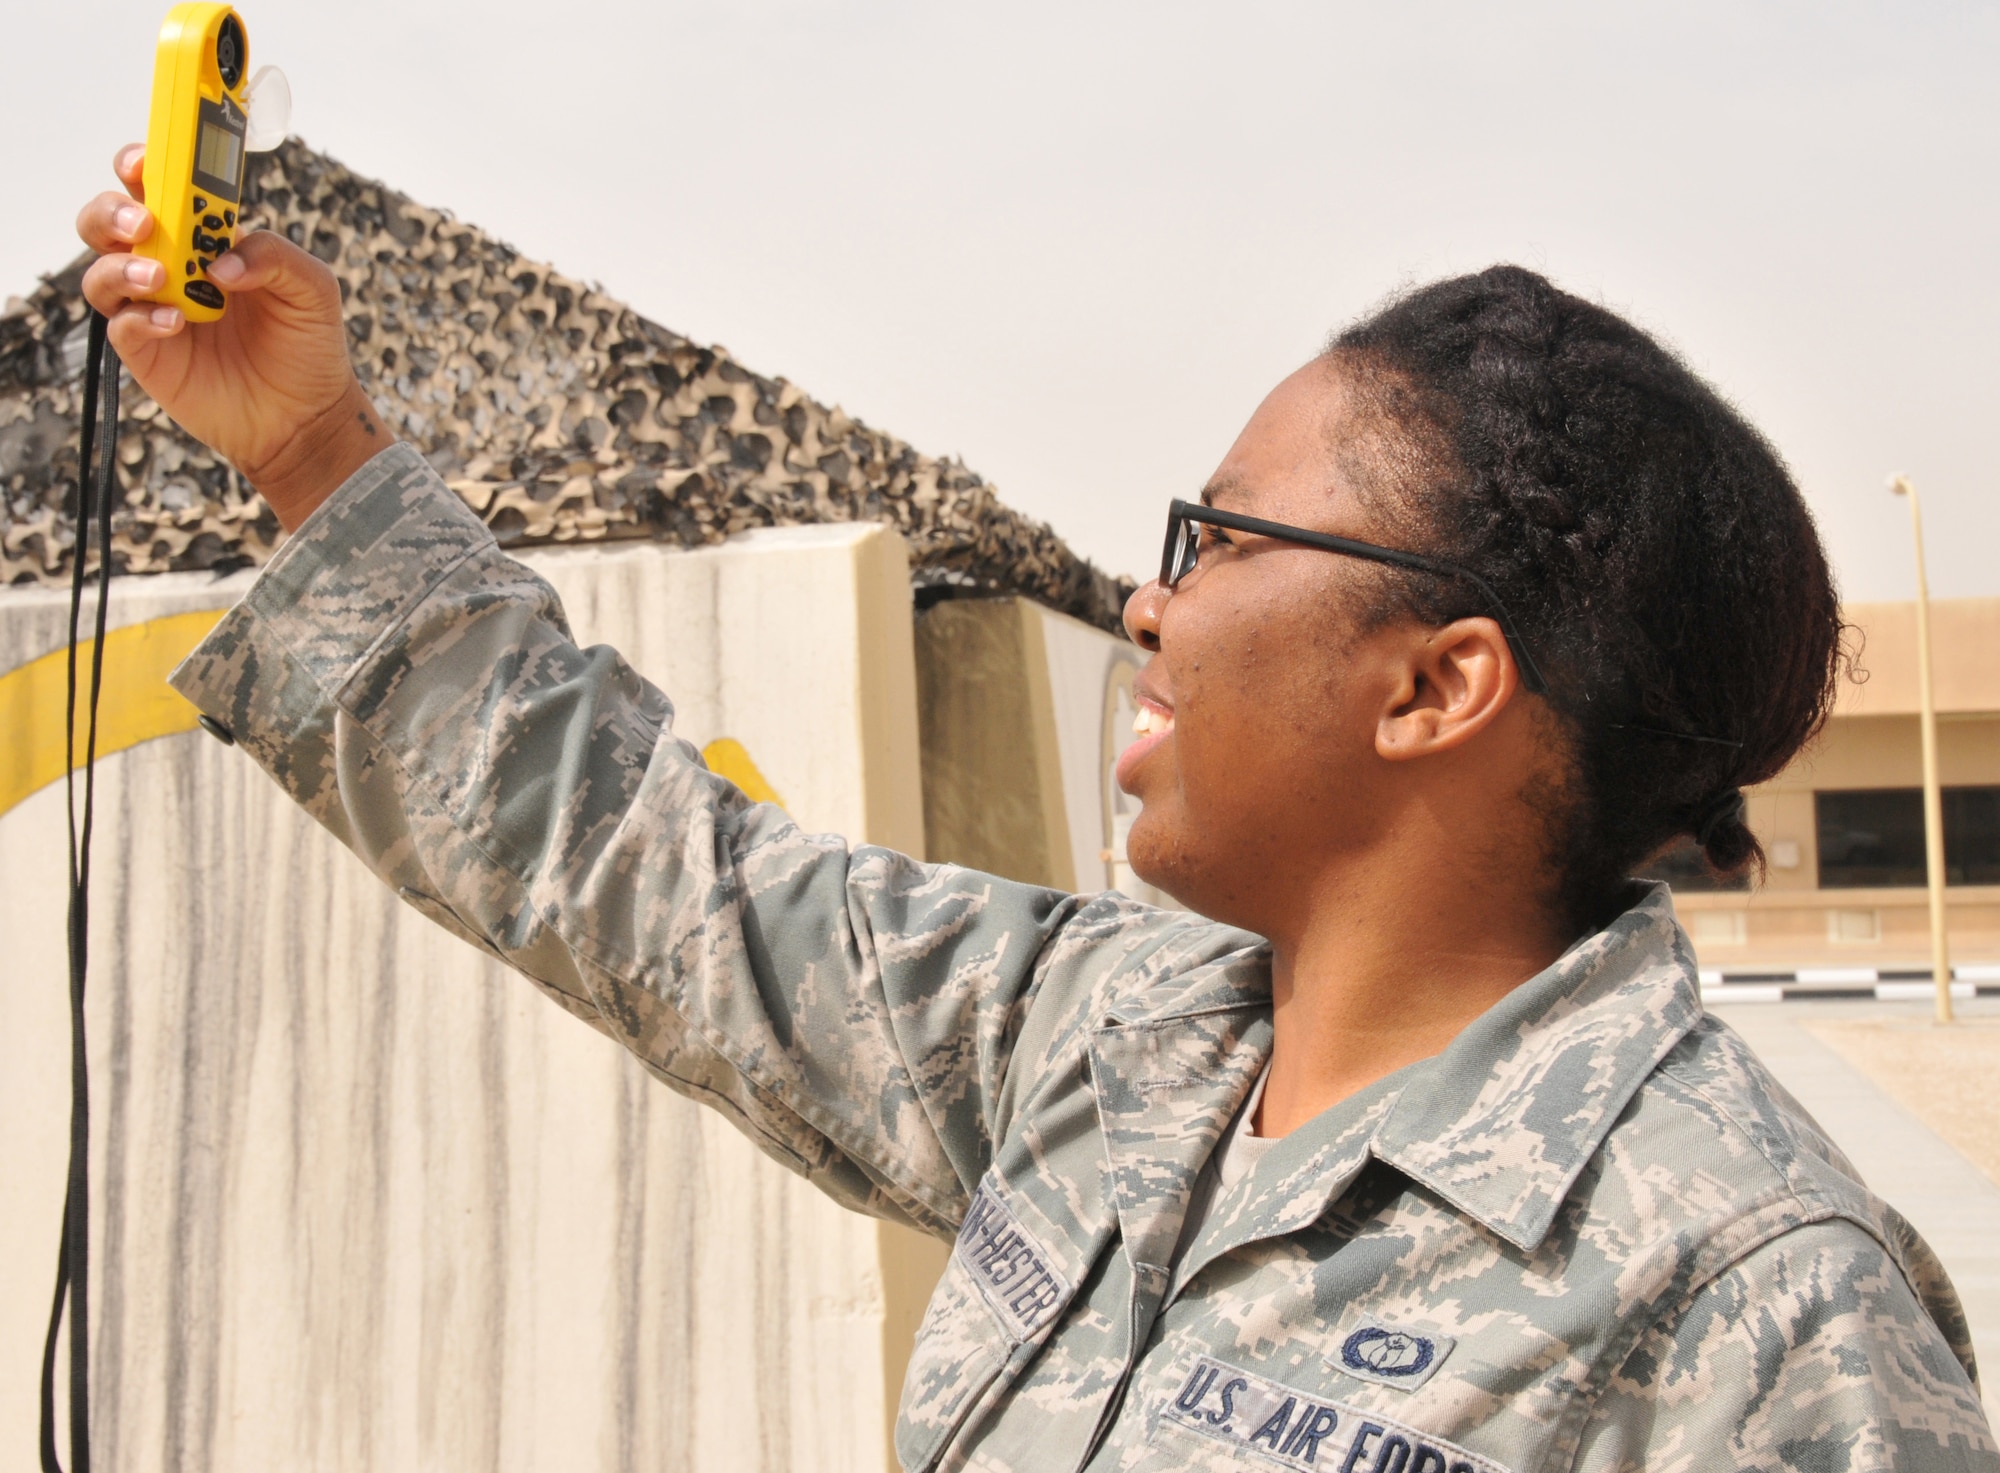 Senior Airman Tania Johnson-Hester, 379th Expeditionary Operations Support Squadron weather forecaster, uses a Kestrel 4500, a pocket weather tracker, March 17 at Al Udeid Air Base, Qatar. Some of the readings a Kestrel 4500 can take are temperature, dew point, wind speed, and humidity. (U.S. Air Force photo by Tech. Sgt. Terrica Y. Jones/Released)